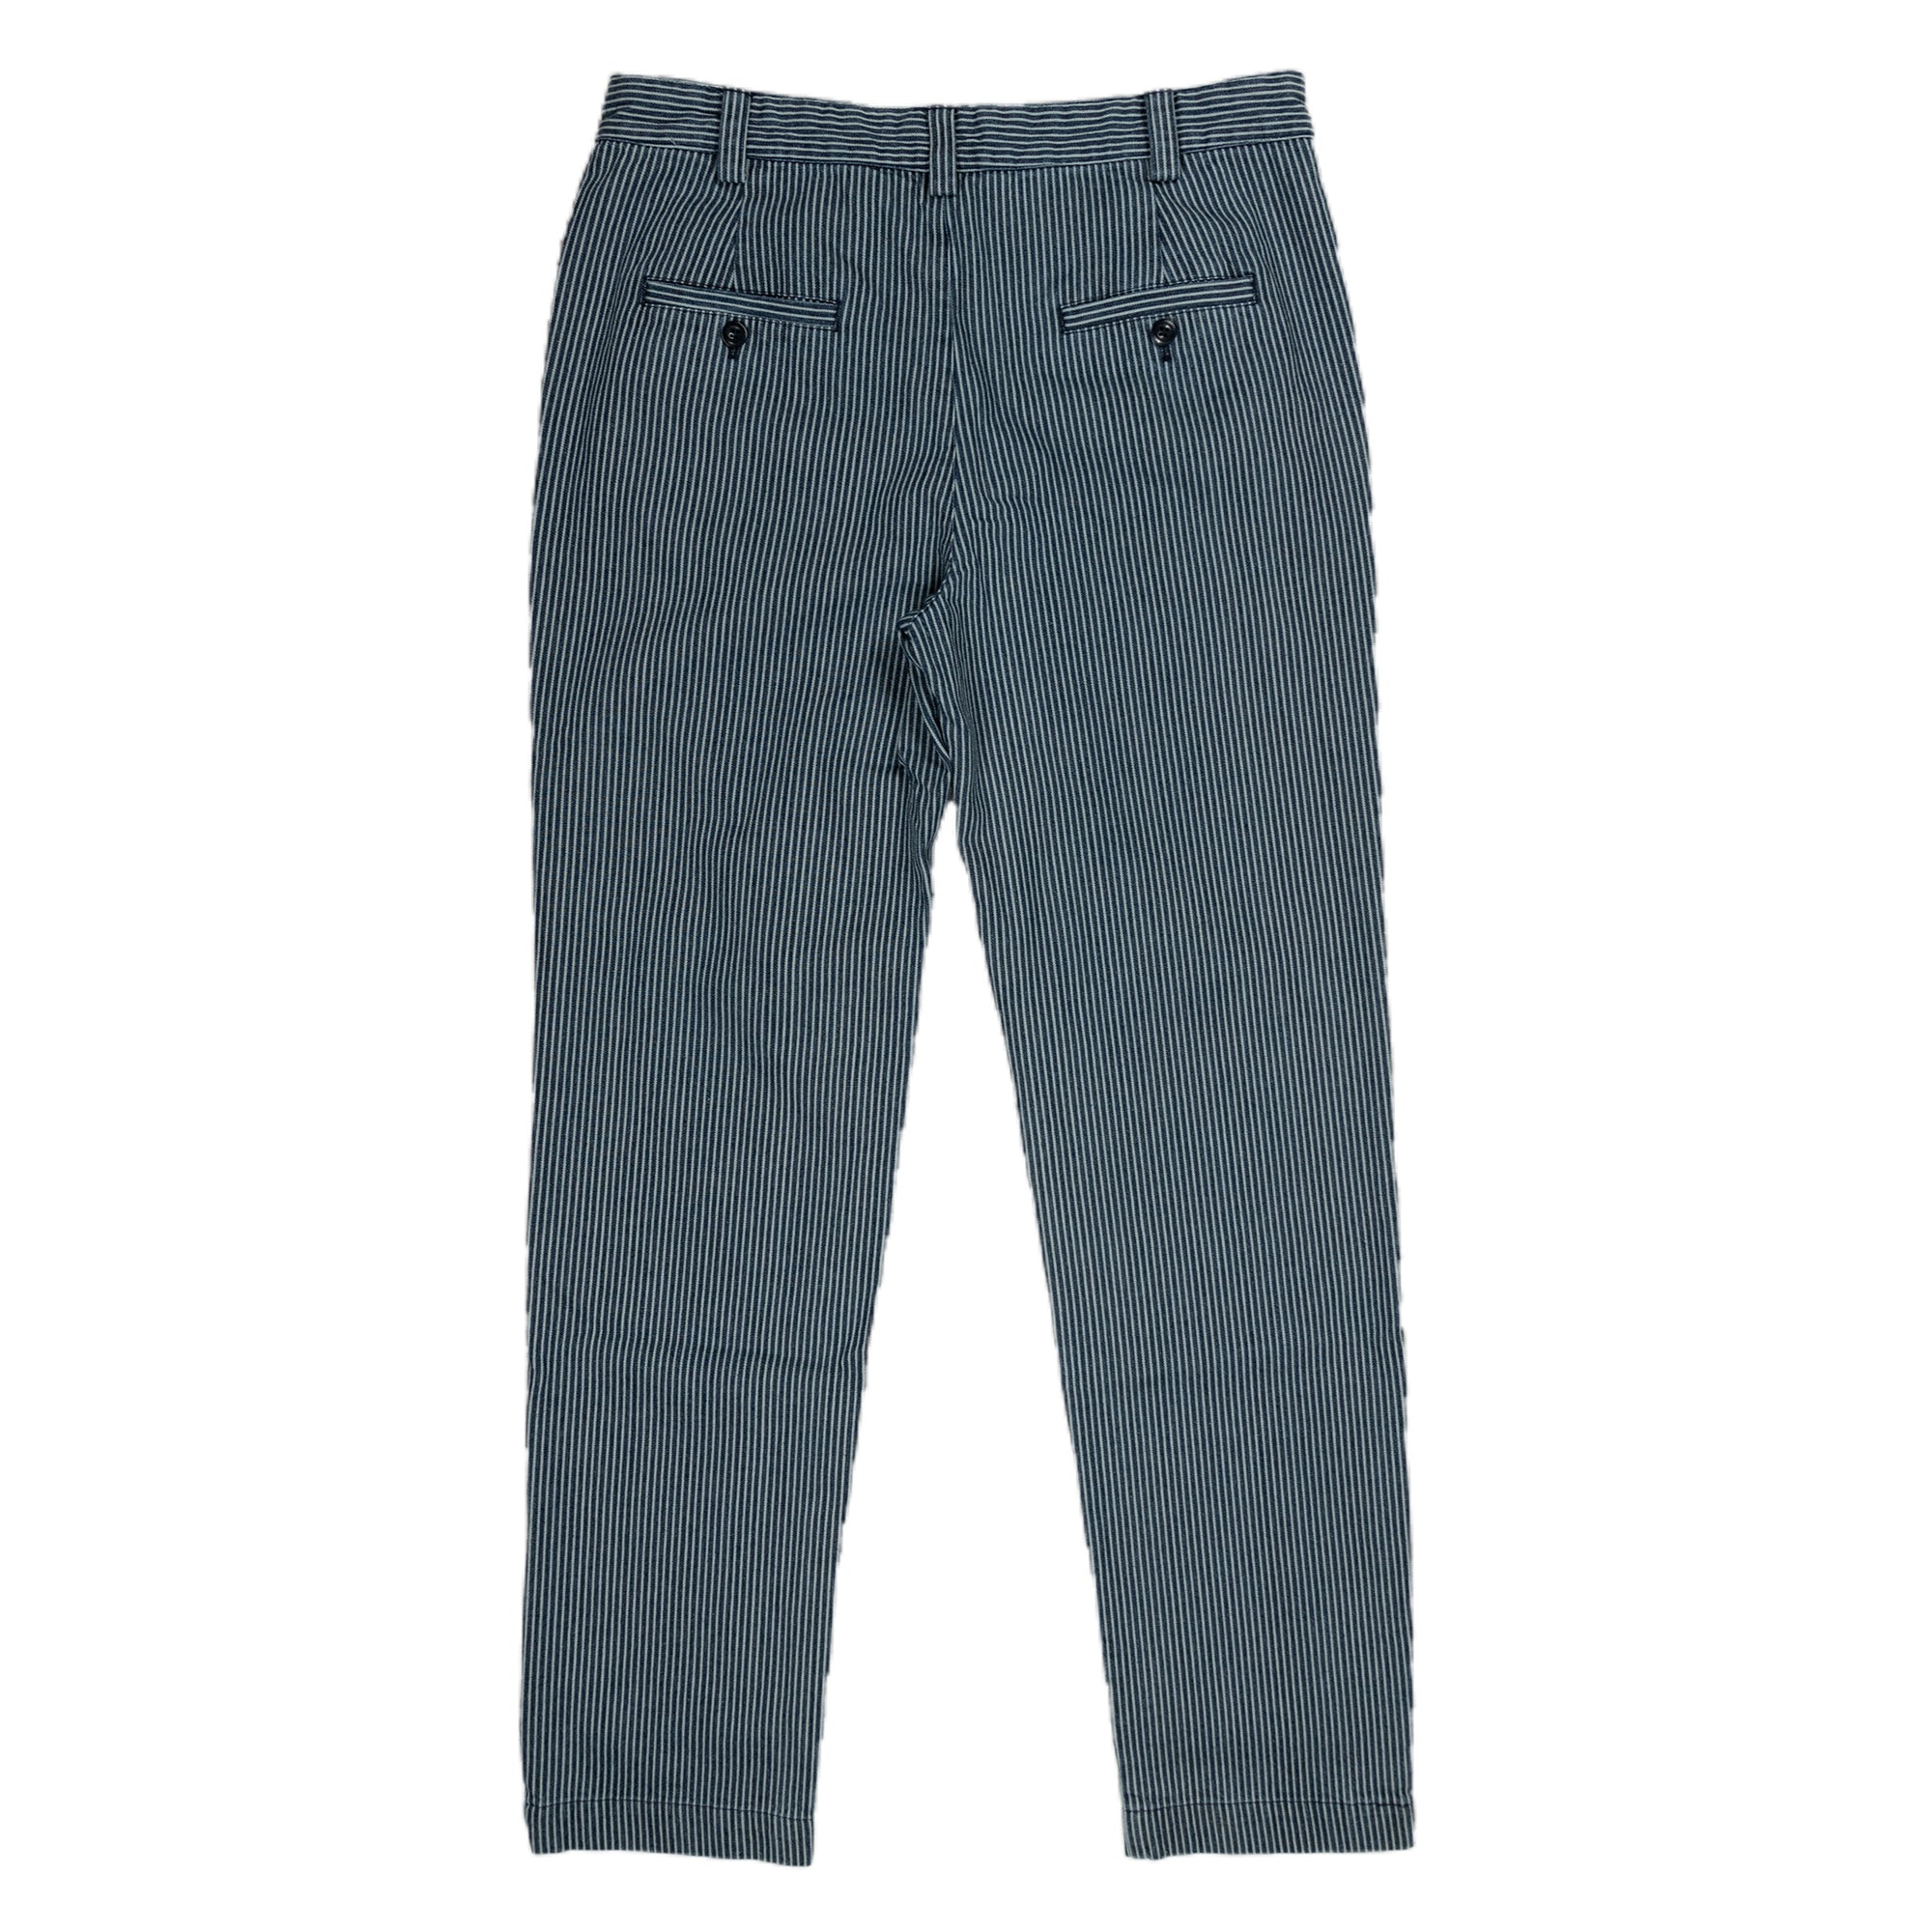 Striped Denim Chino Trousers - Wallace Mercantile Shop